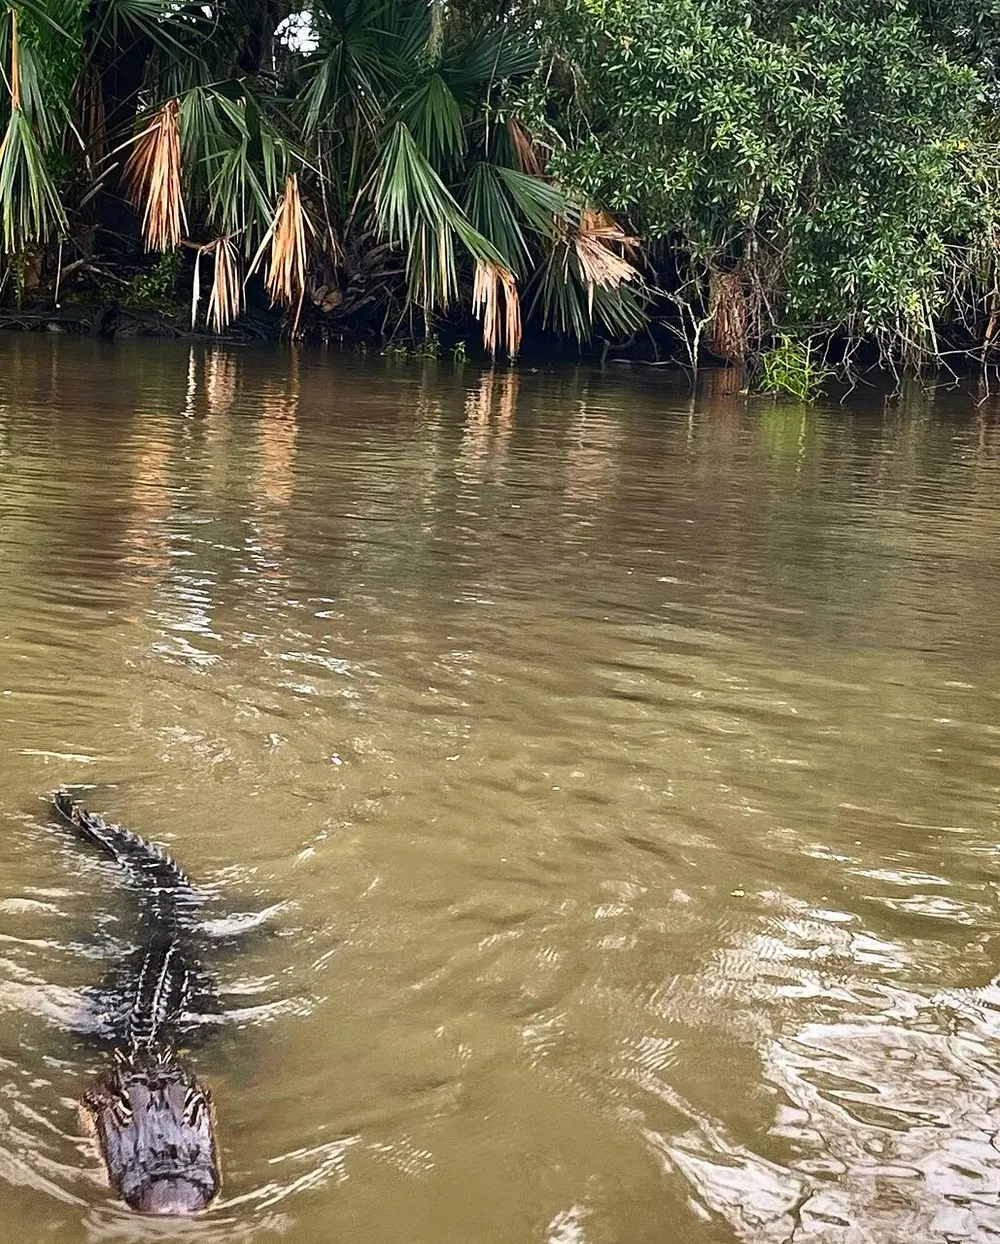 An alligator swims toward the camera in murky water with tropical foliage in the background